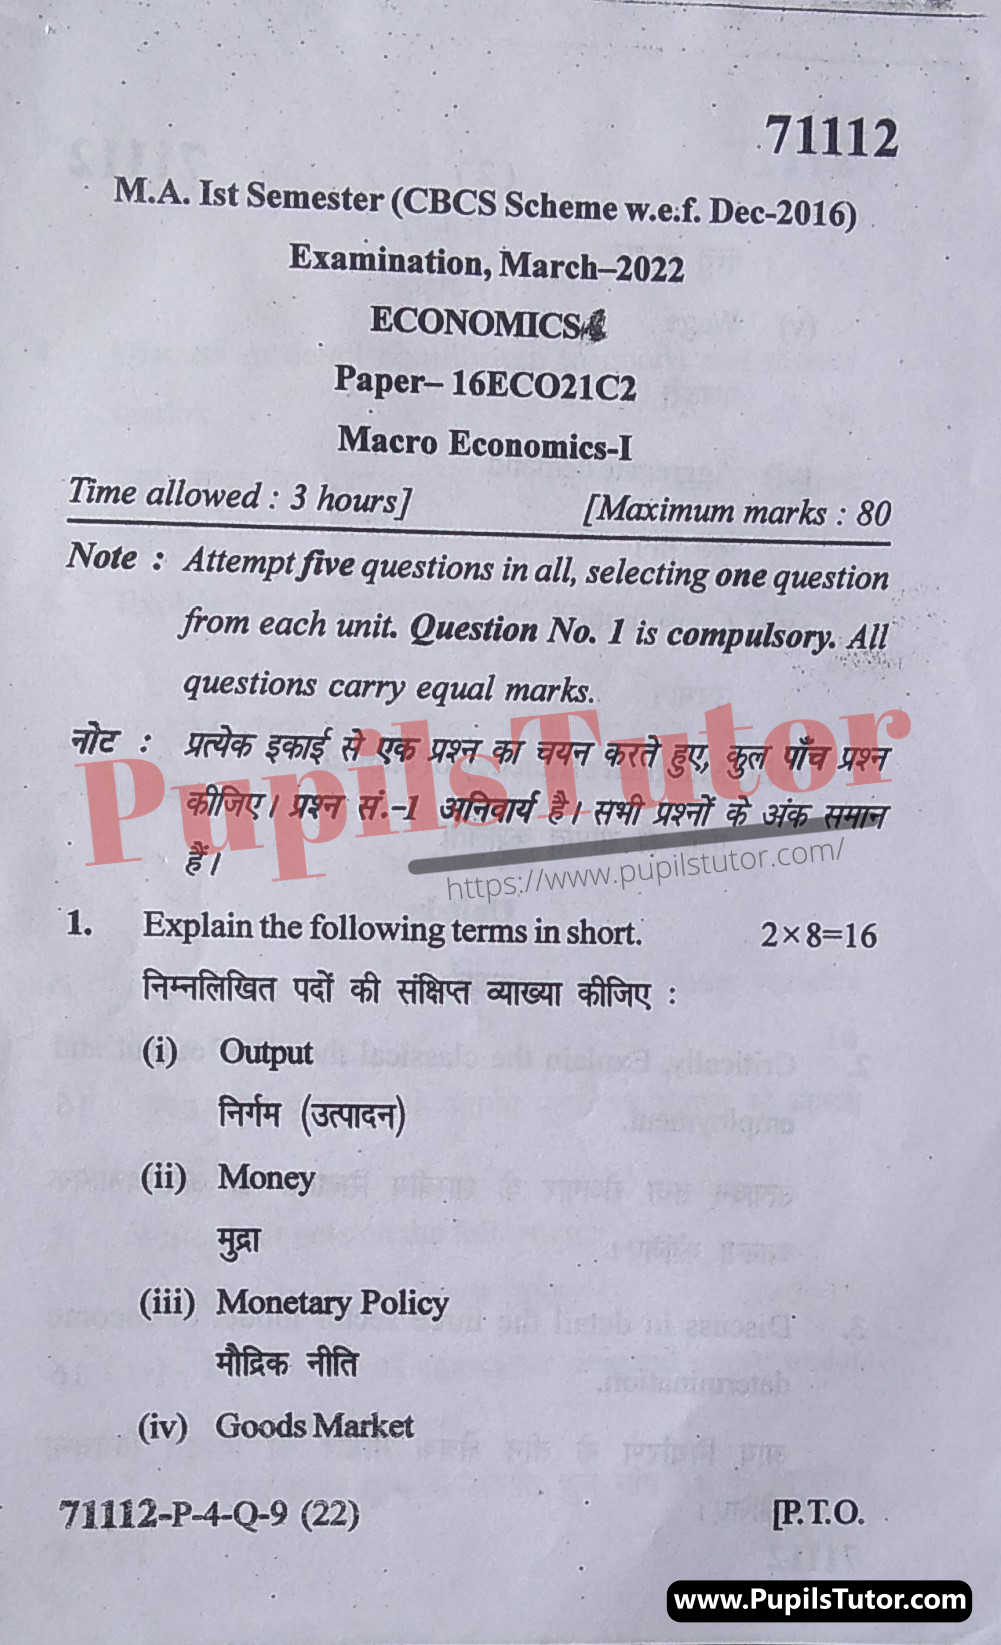 MDU (Maharshi Dayanand University, Rohtak Haryana) MA Economics CBCS Scheme First Semester Previous Year Macro Economics Question Paper For March, 2022 Exam (Question Paper Page 1) - pupilstutor.com